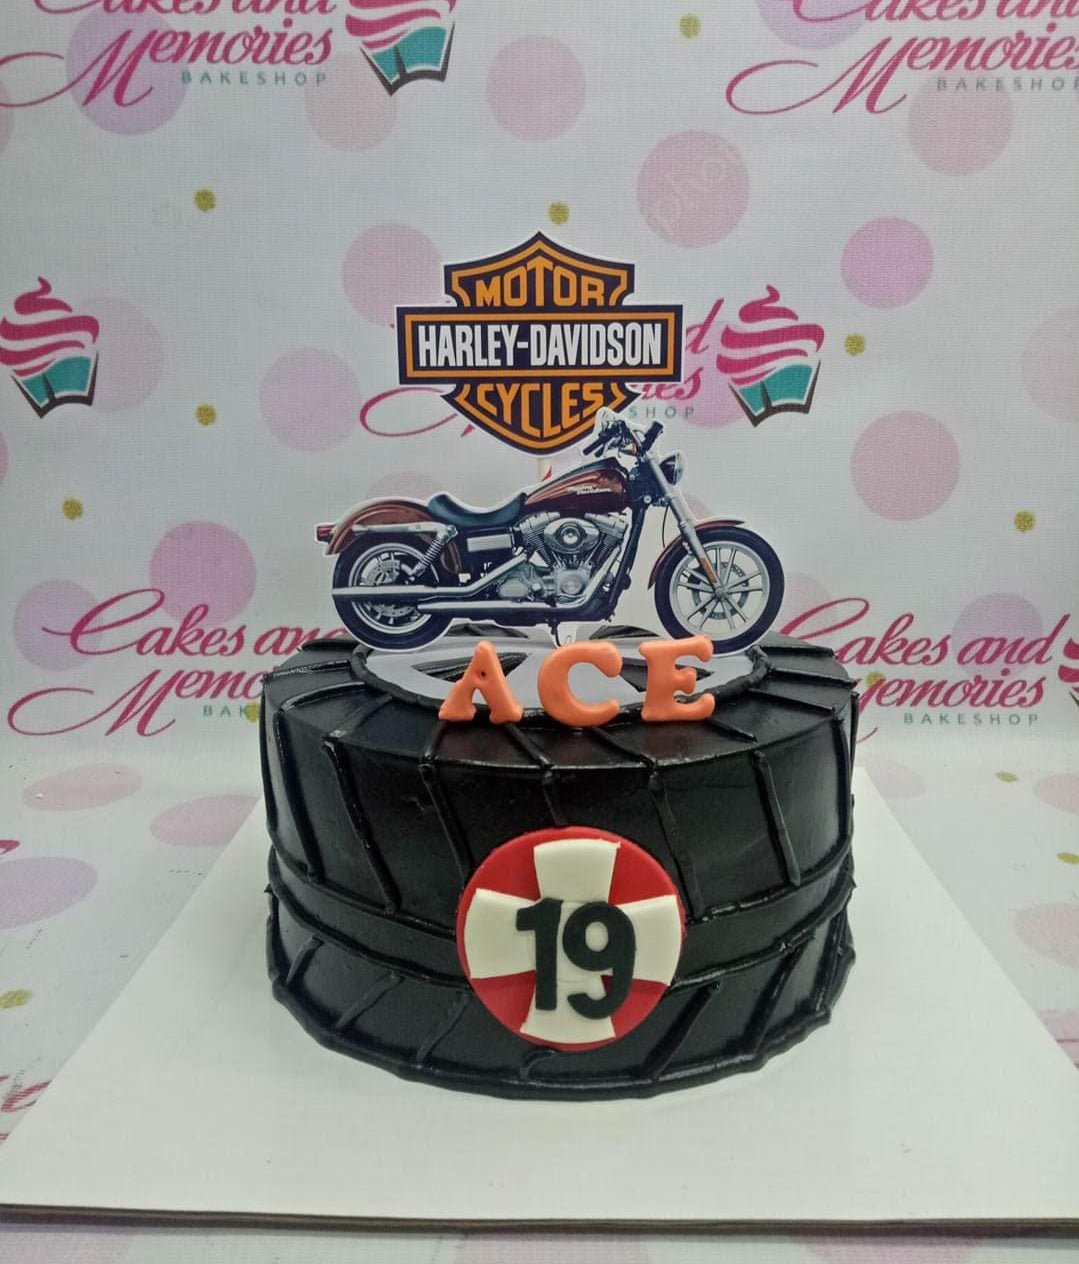 Motorcycle Cake - 1112 – Cakes and Memories Bakeshop